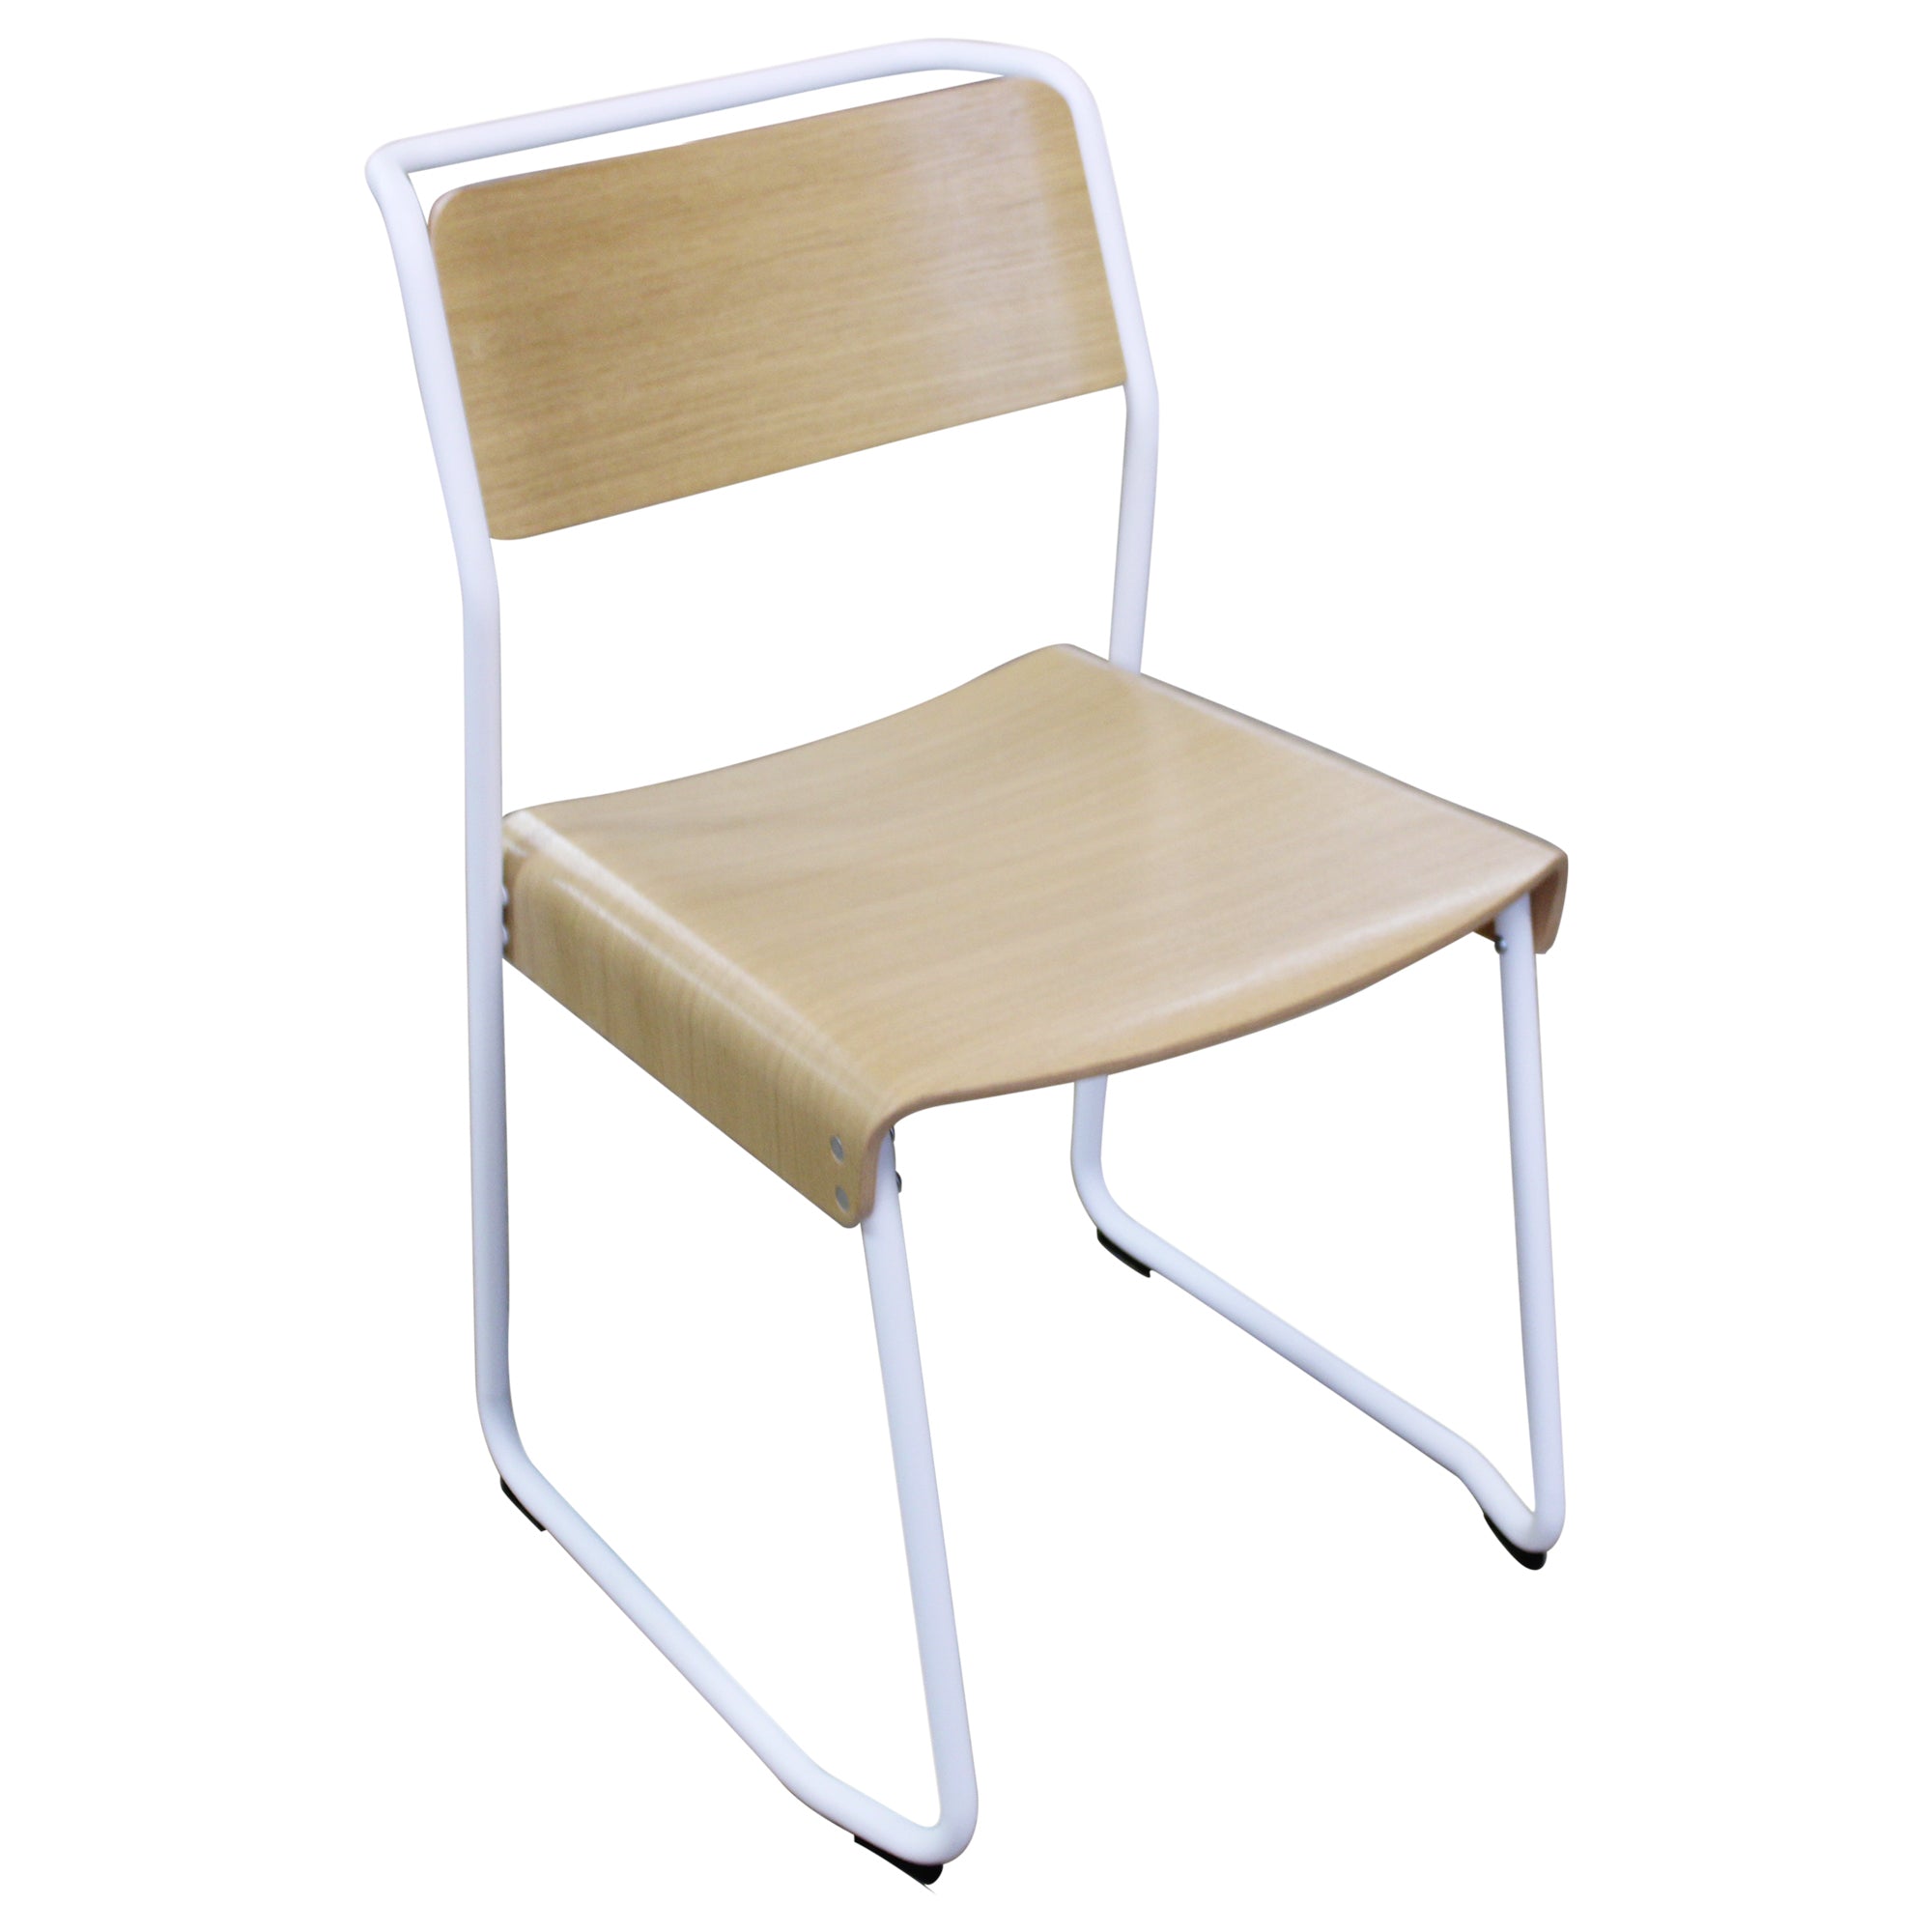 Very Good & Proper Canteen Utility Chair - Preowned